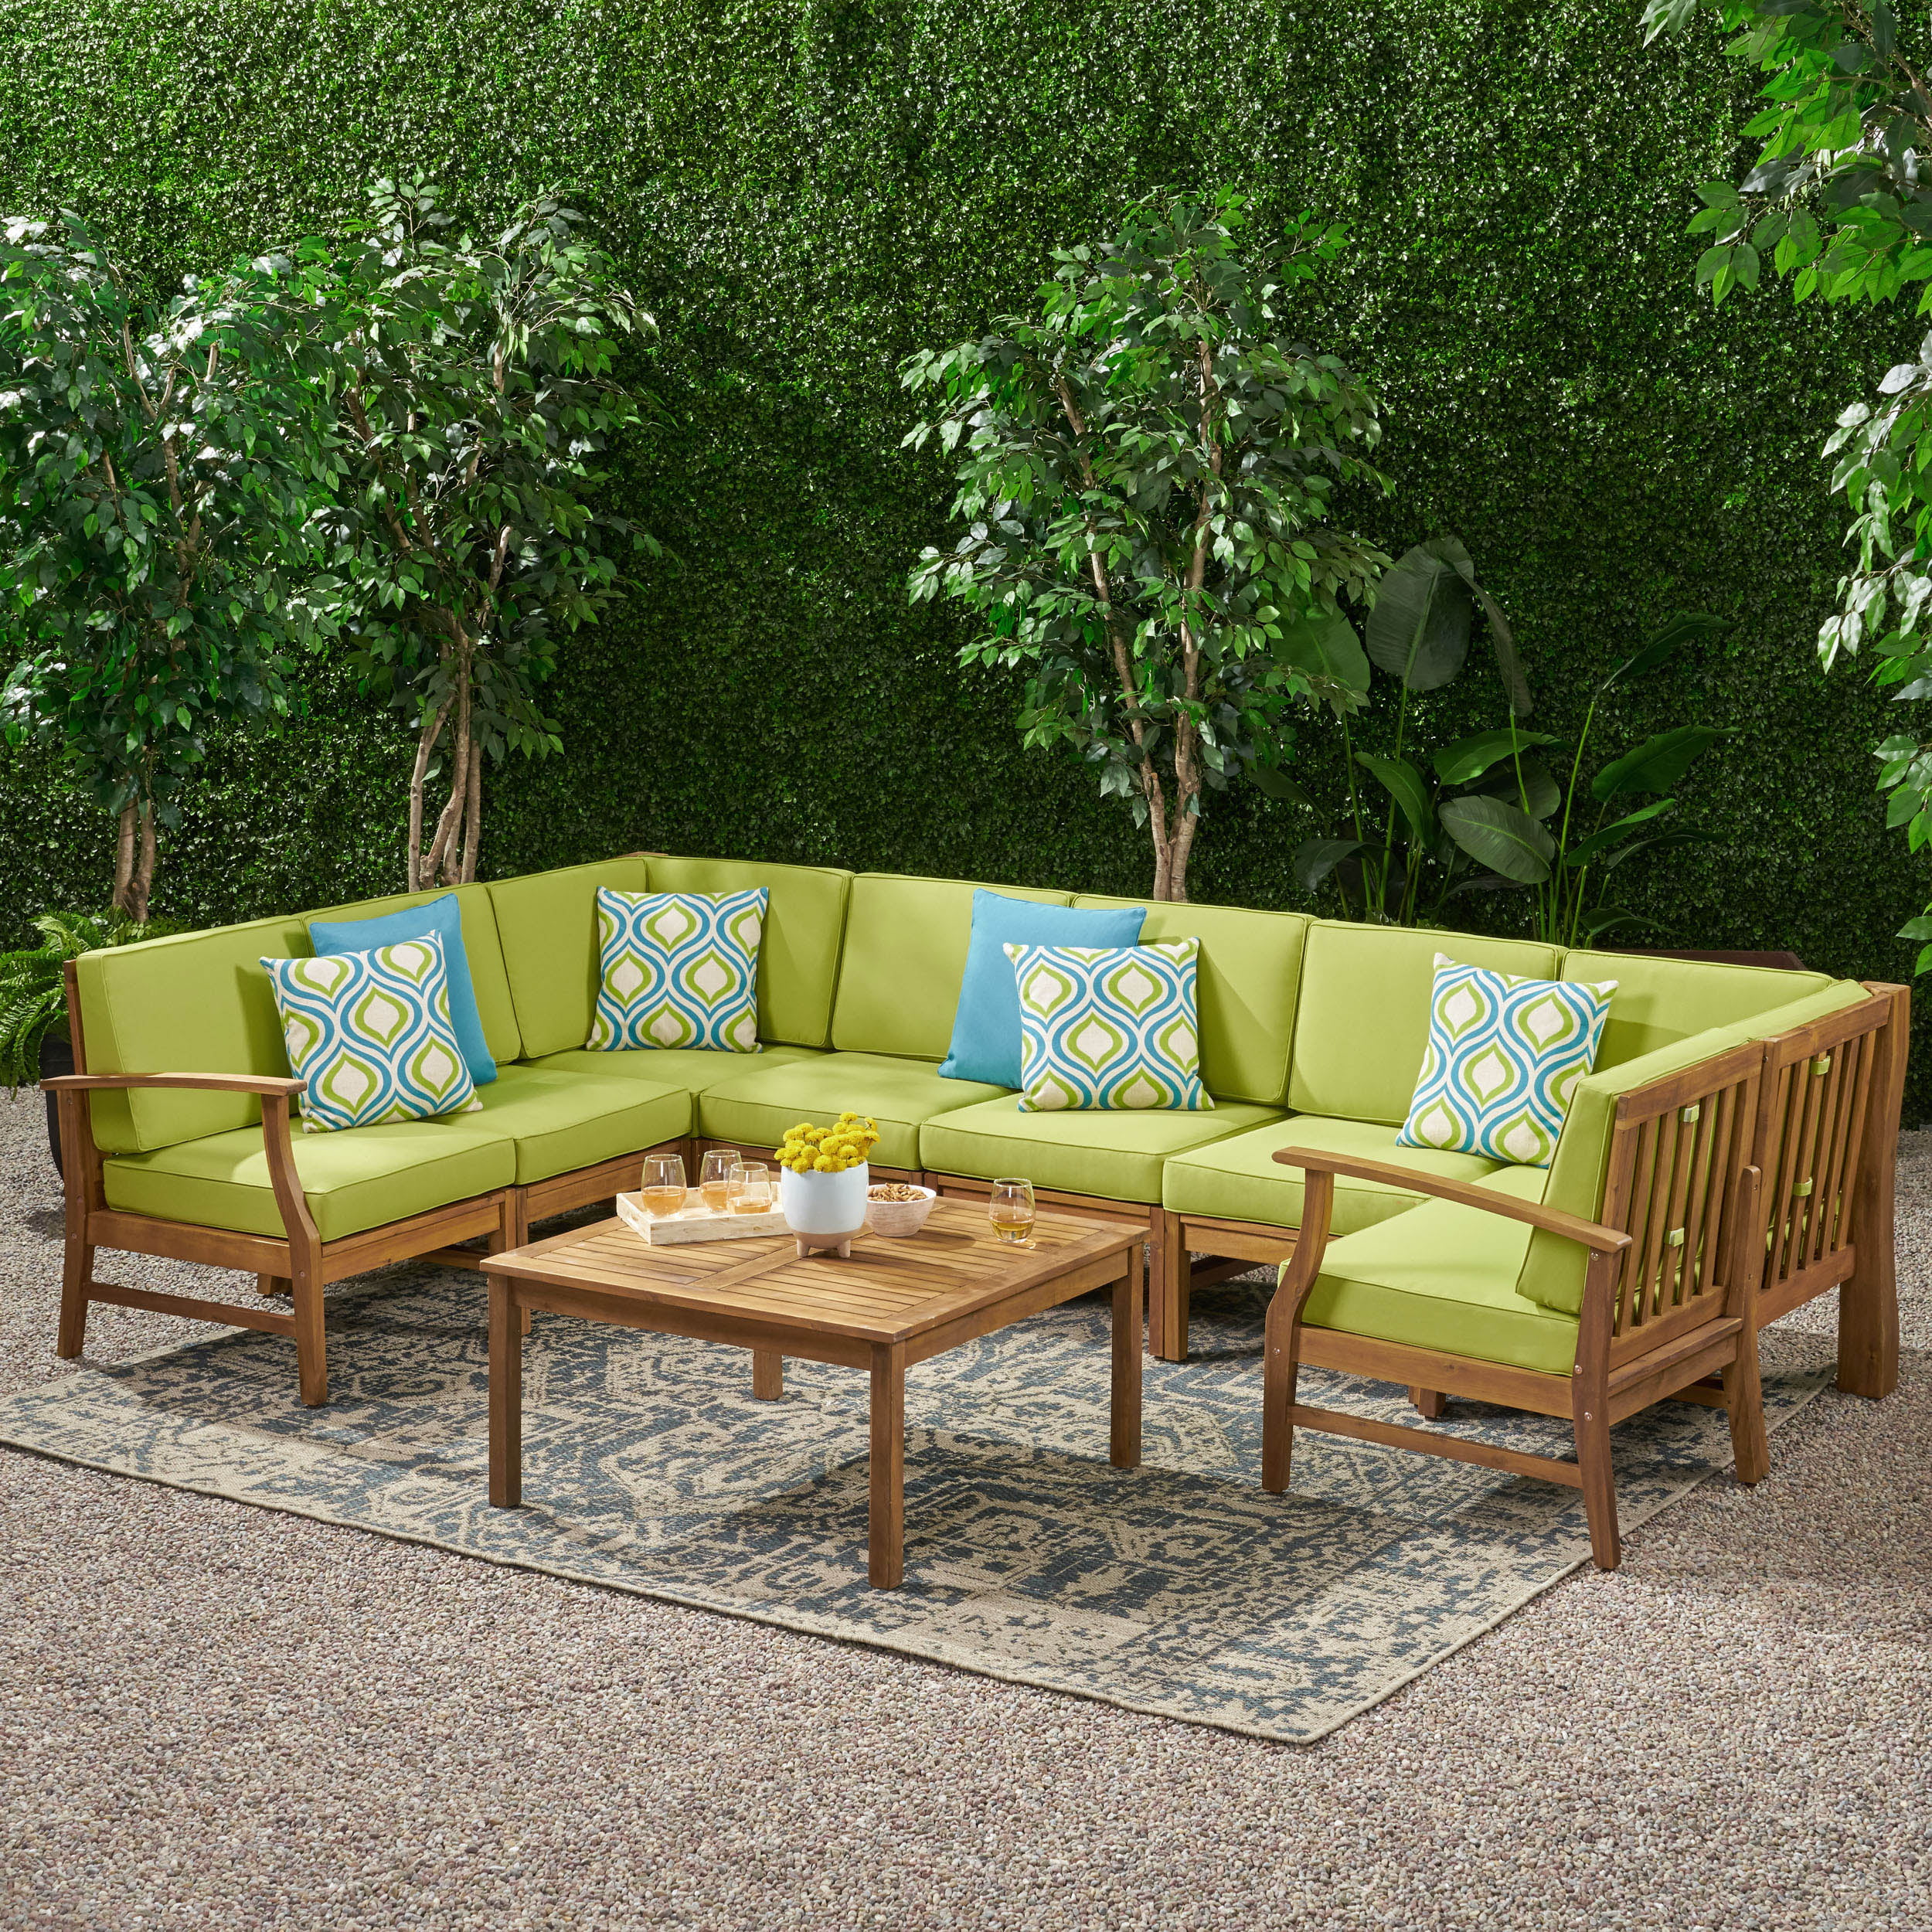 Stylish Teak Furniture For Outdoor Spaces